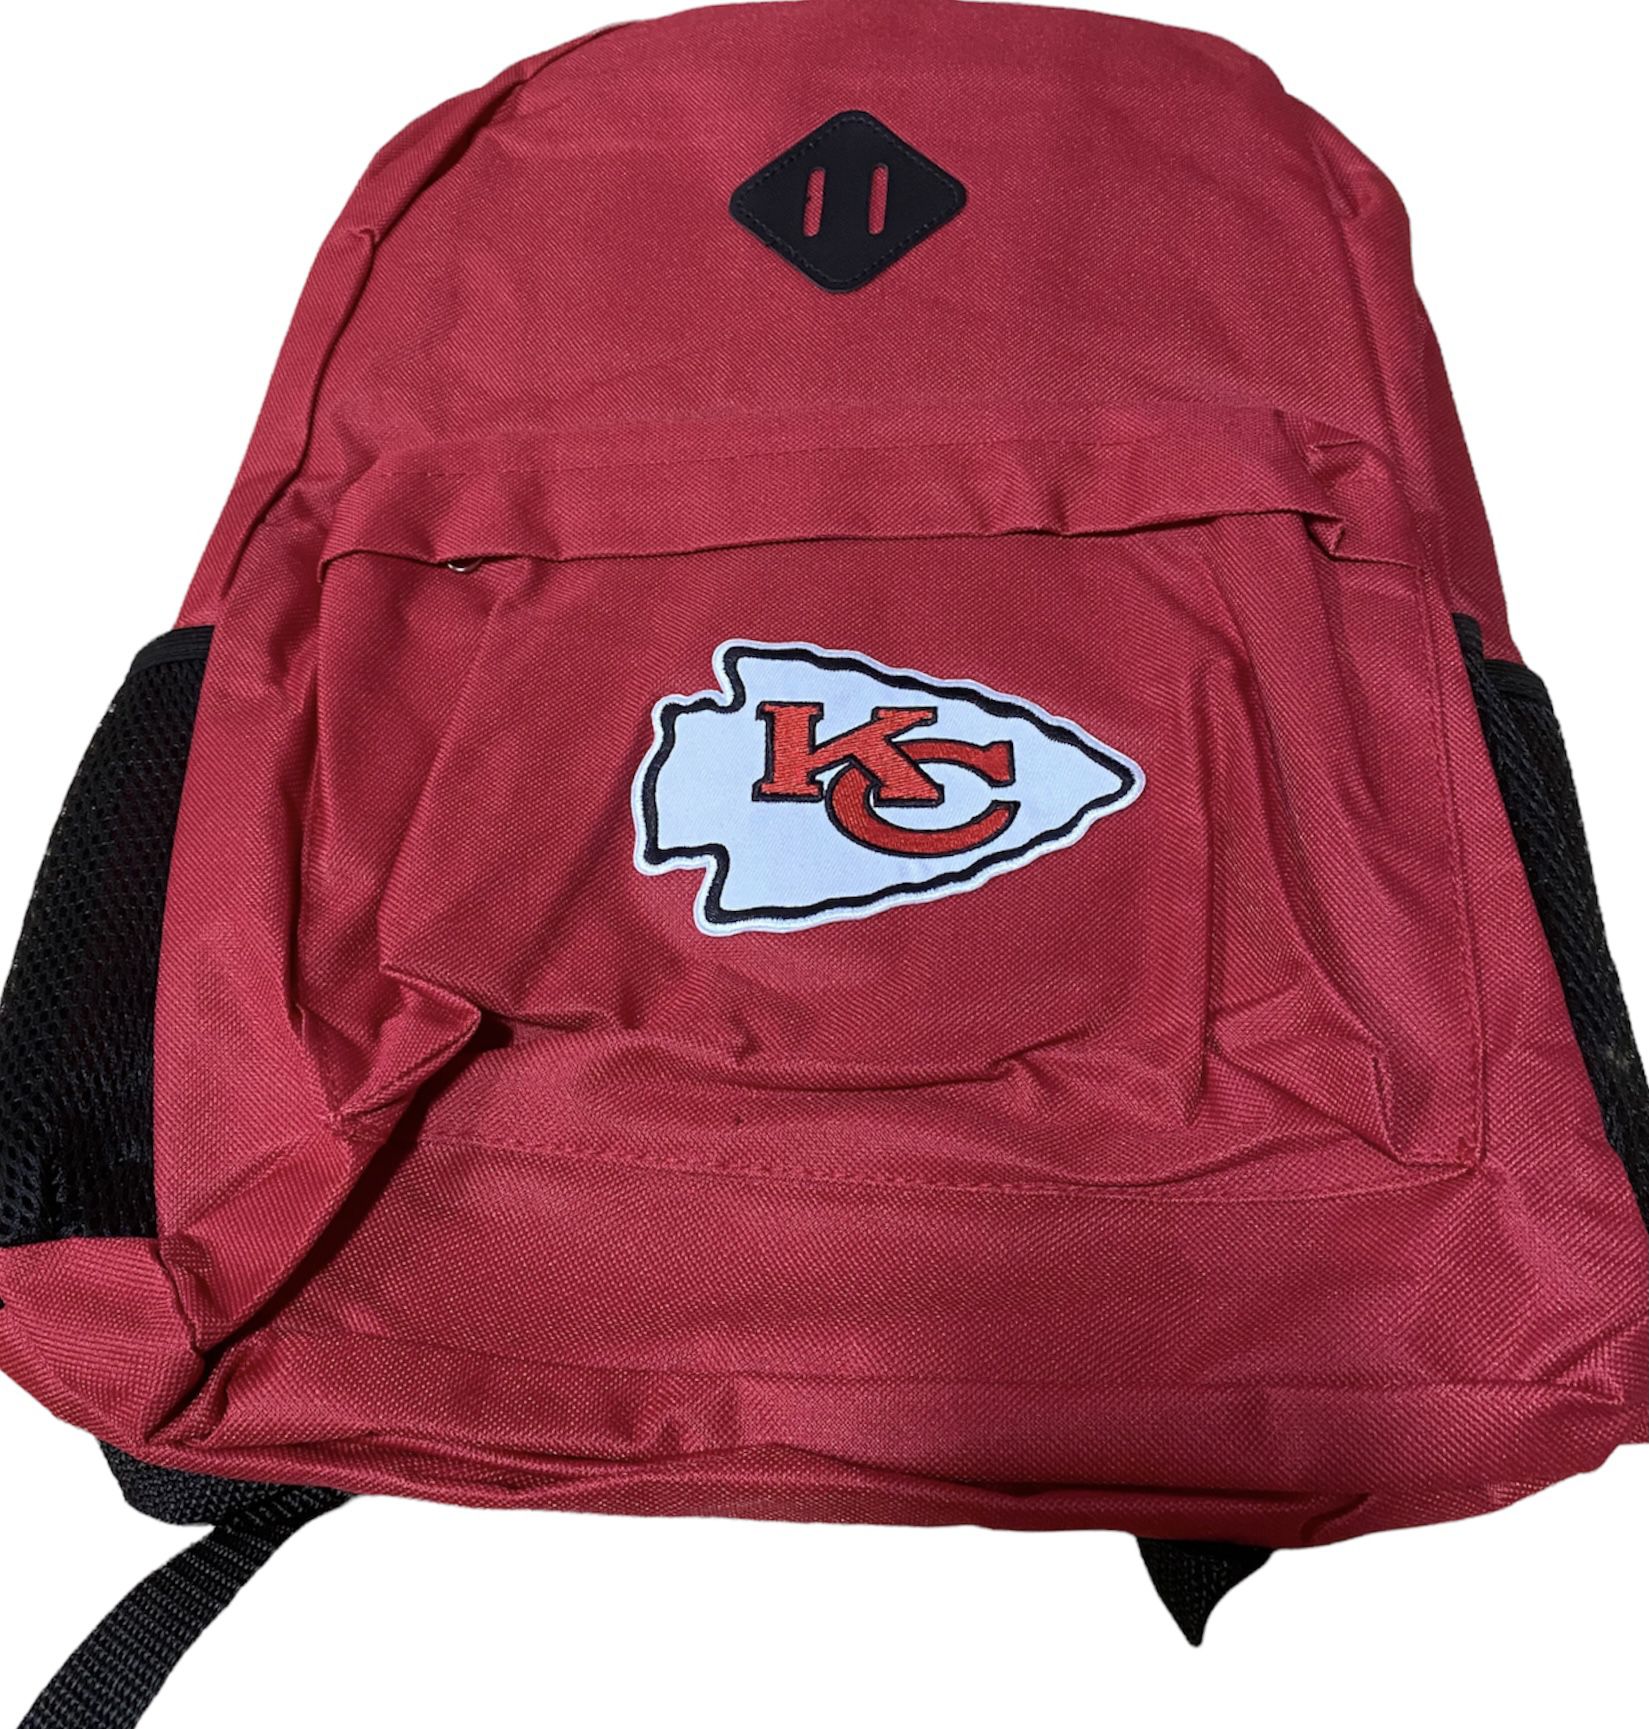 Kansas City chiefs NFL backpack brand new red 